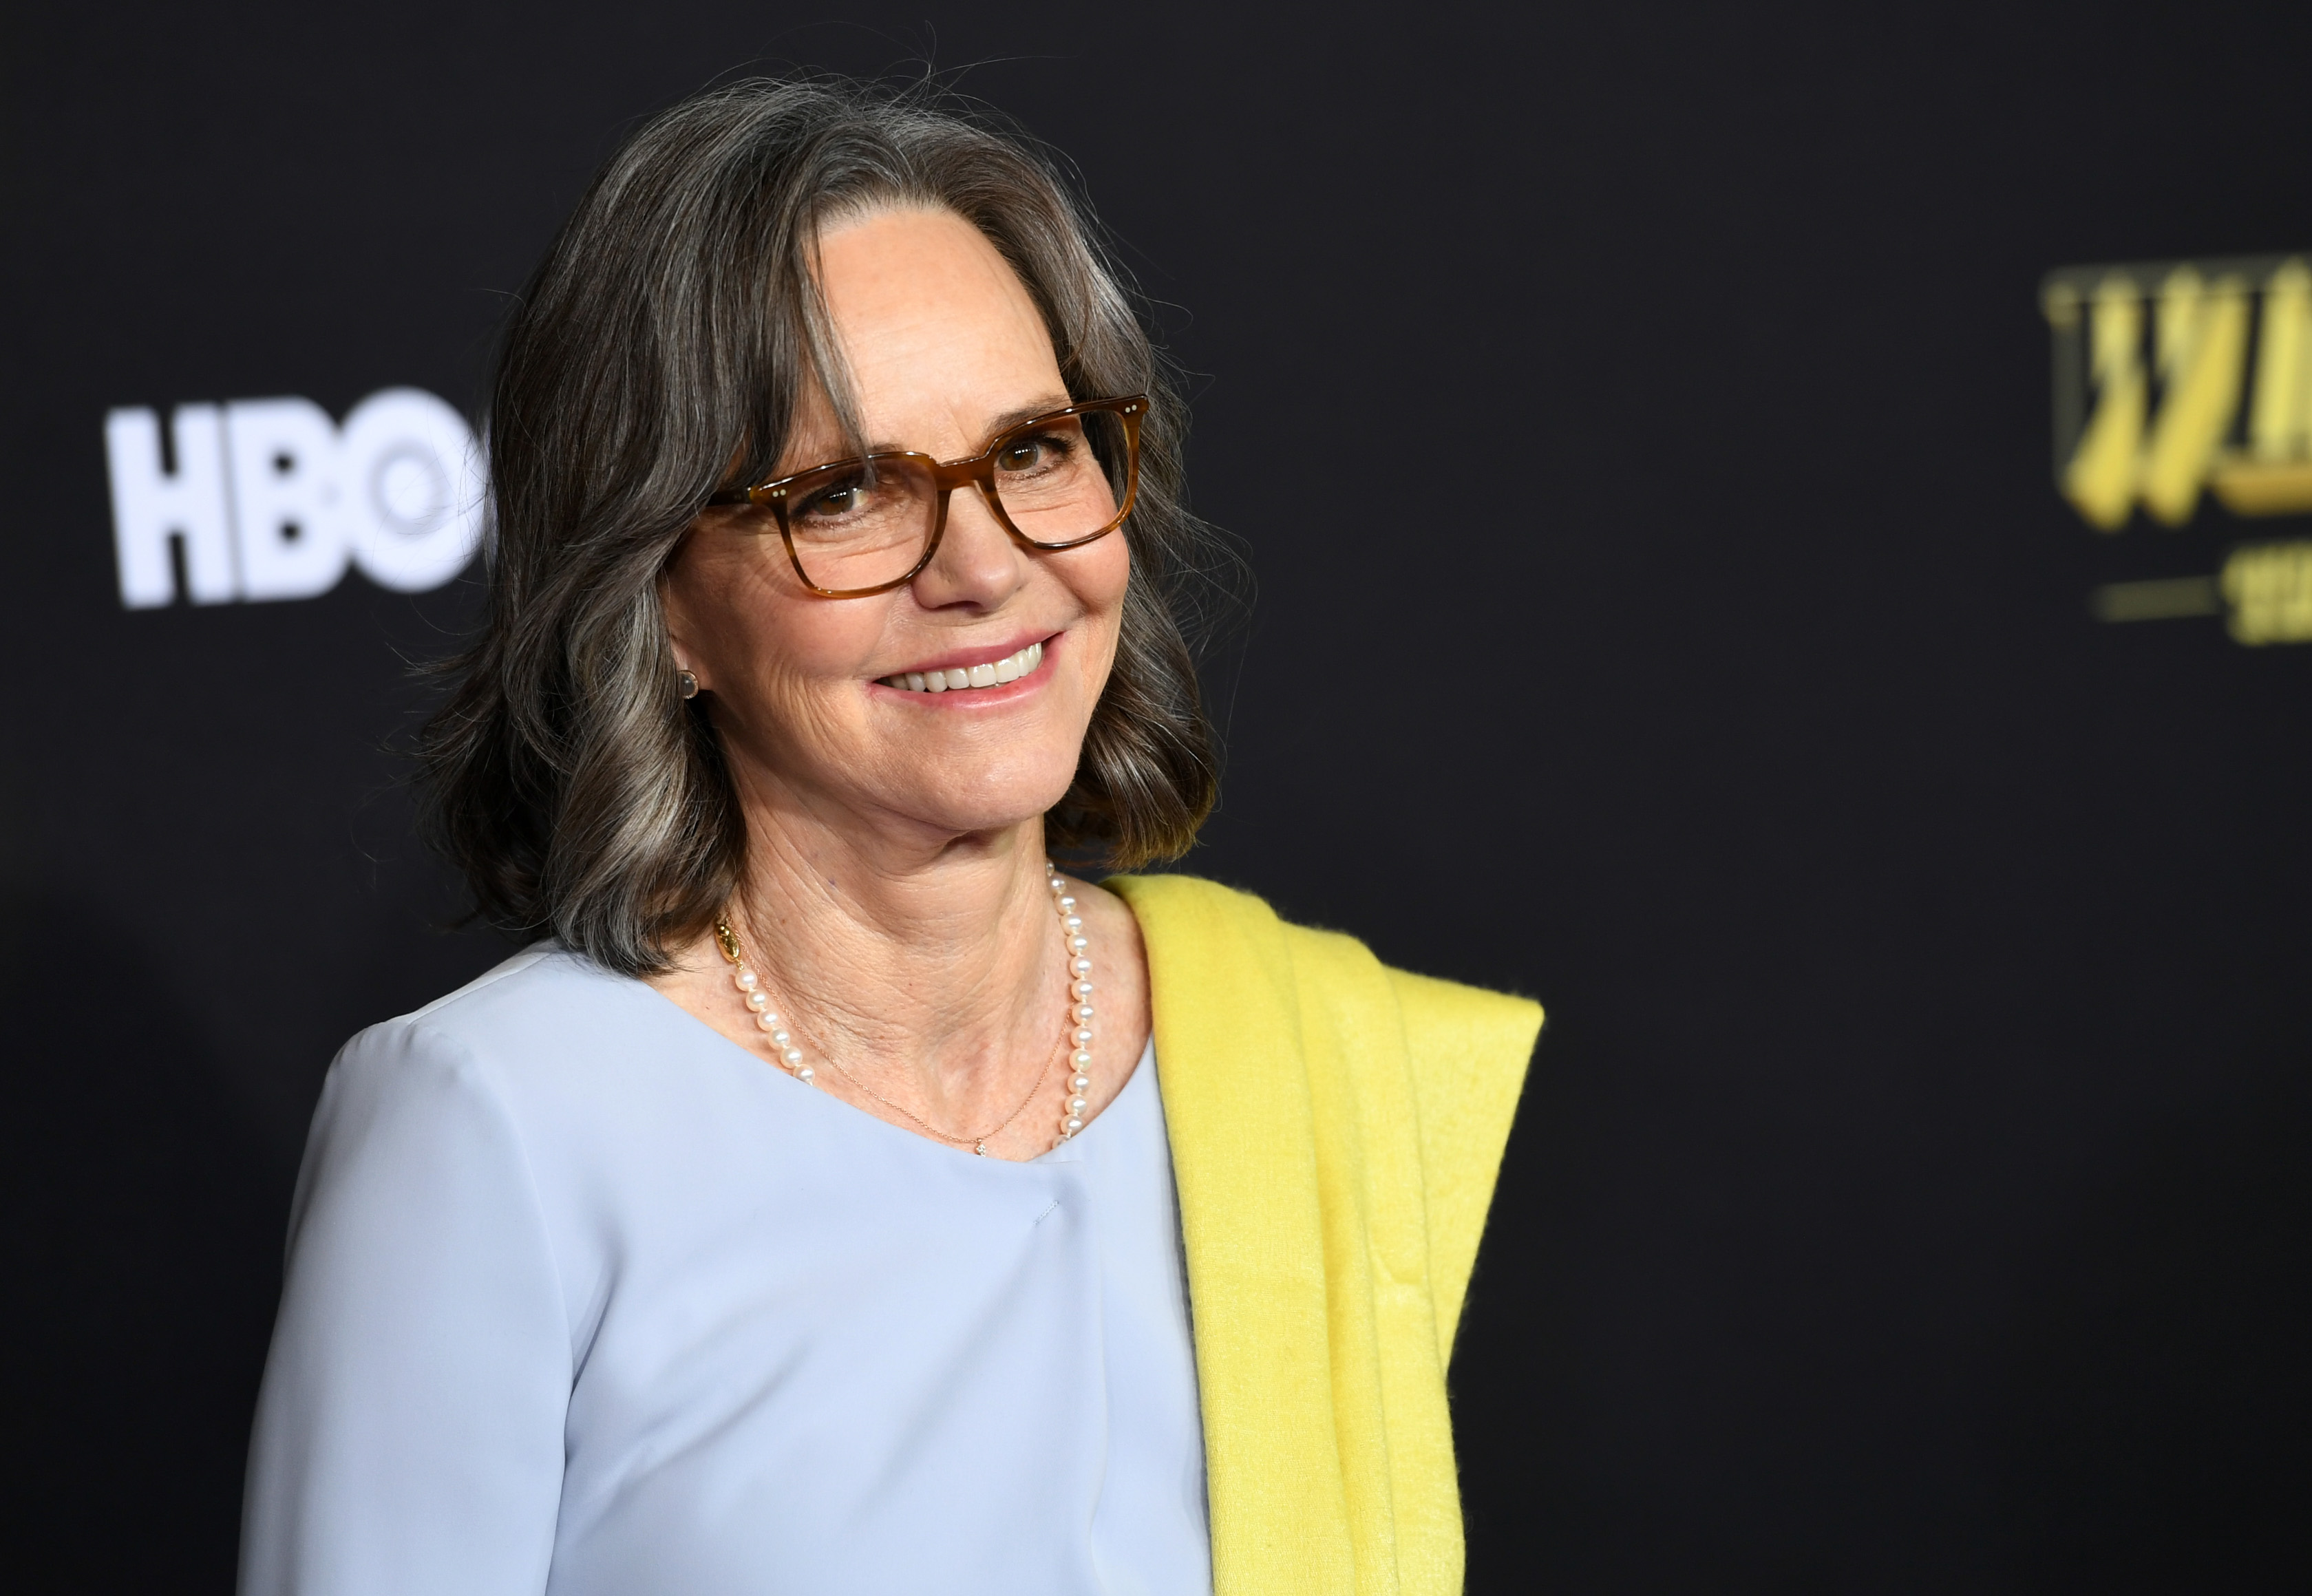 Sally Field at the premiere of HBO's "Winning Time: The Rise Of The Lakers Dynasty" in Los Angeles, California on March 2, 2022 | Source: Getty Images